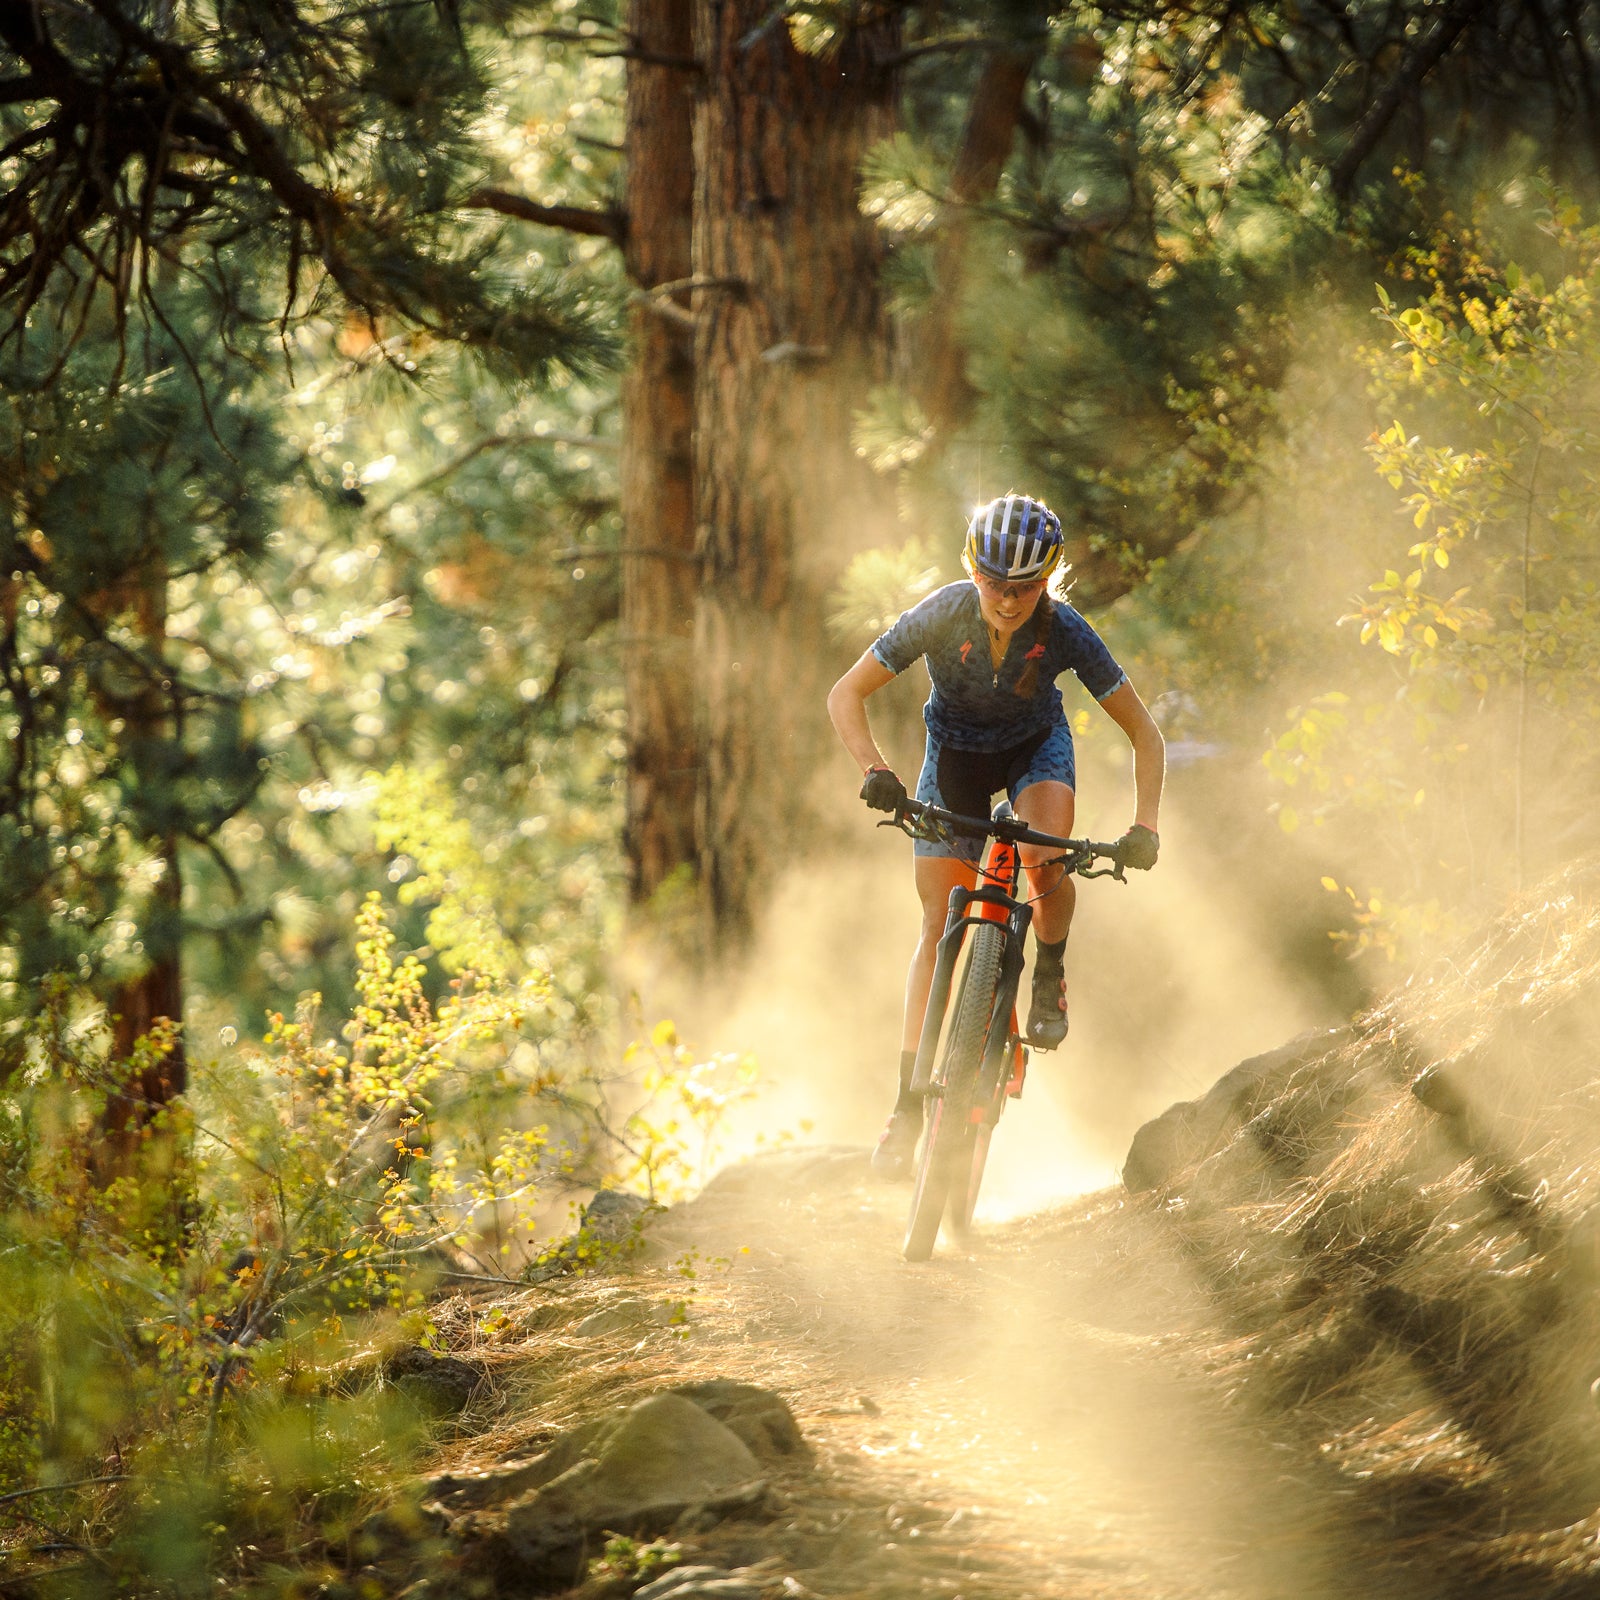 Can You Ride a Mountain Bike on the Road? Road Riding Tips for Mountain Bikers